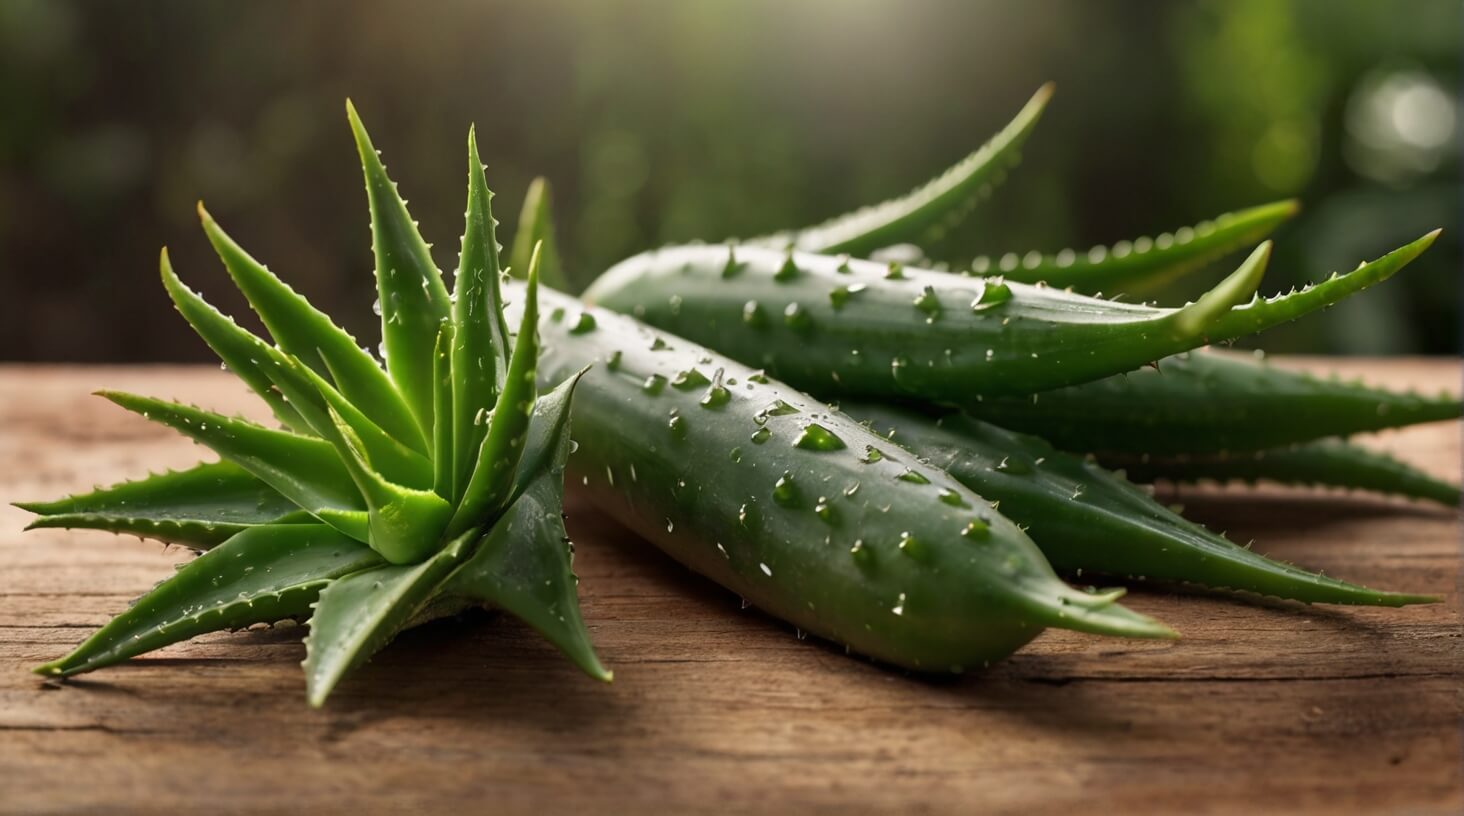 A close-up image of a vibrant aloe vera plant, symbolizing the support it provides to immunity with its natural properties.